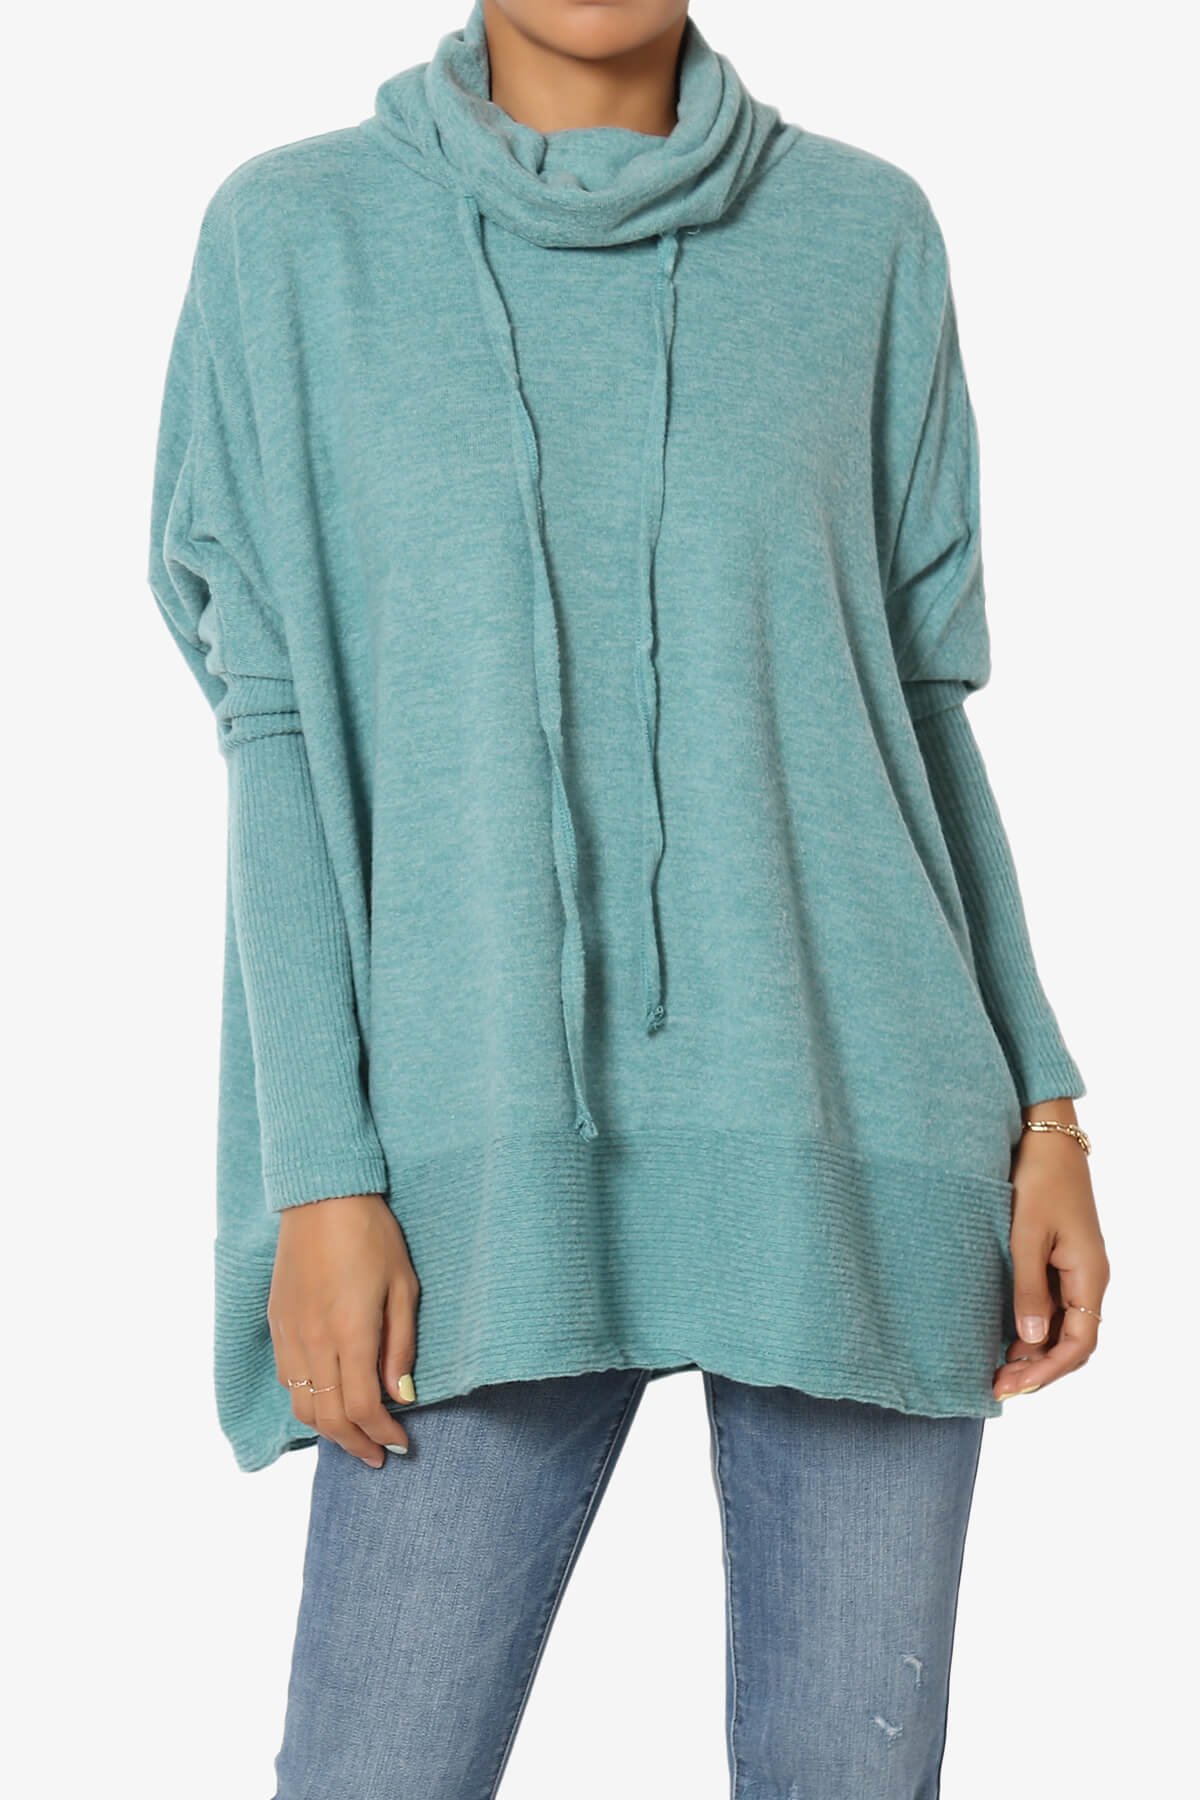 Barclay Cowl Neck Melange Knit Oversized Sweater DUSTY TEAL_1